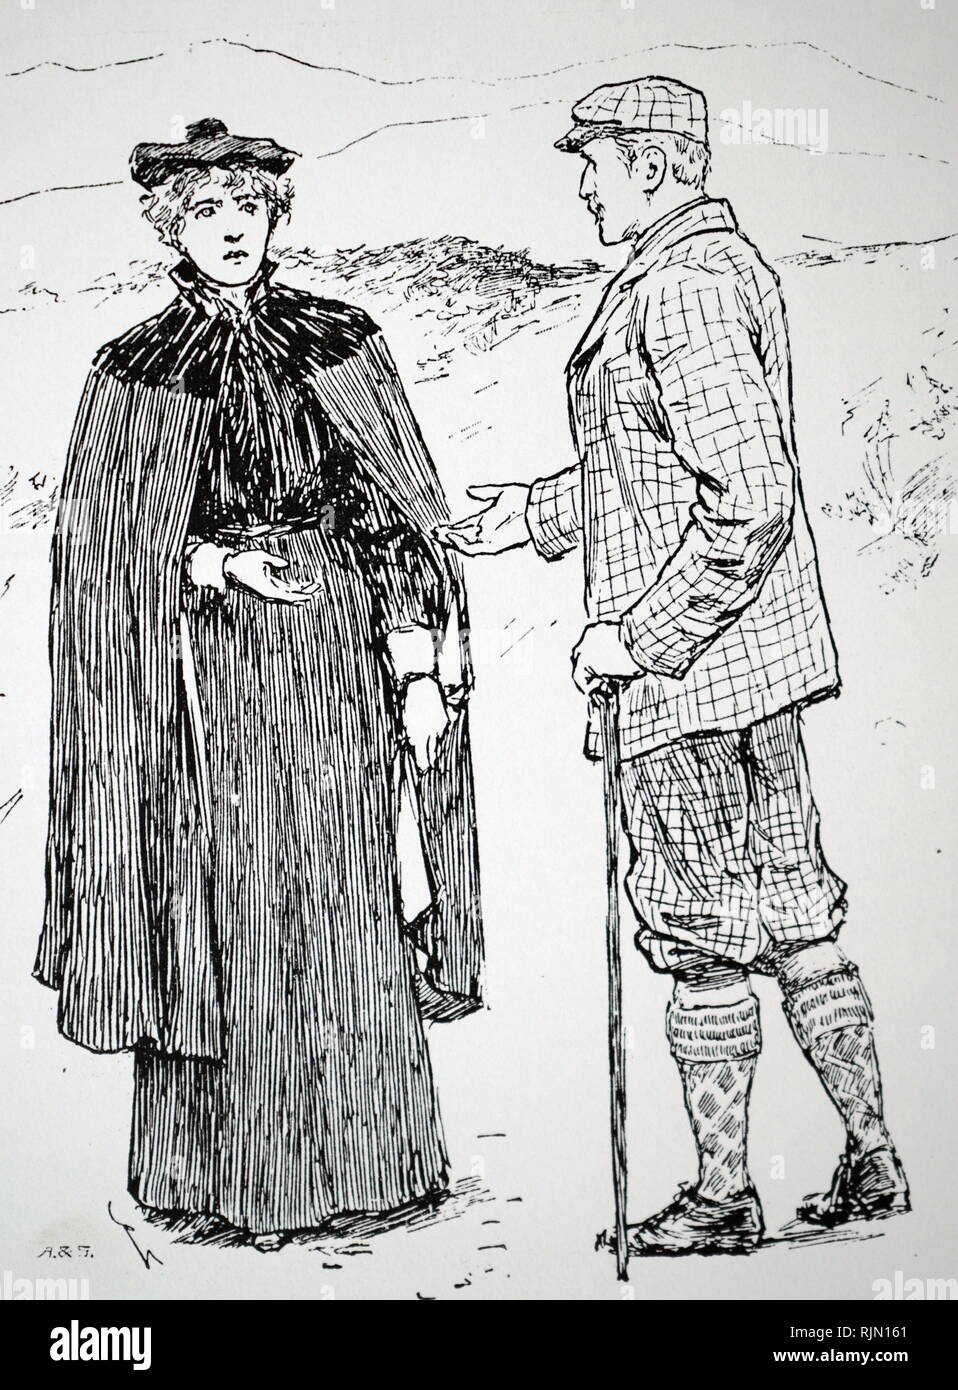 Illustration showing Man in PLUS-FOURS, THREE-QUARTER HOSE and BROGUES: woman wearing TAM-O-SHANTER 1897 Stock Photo